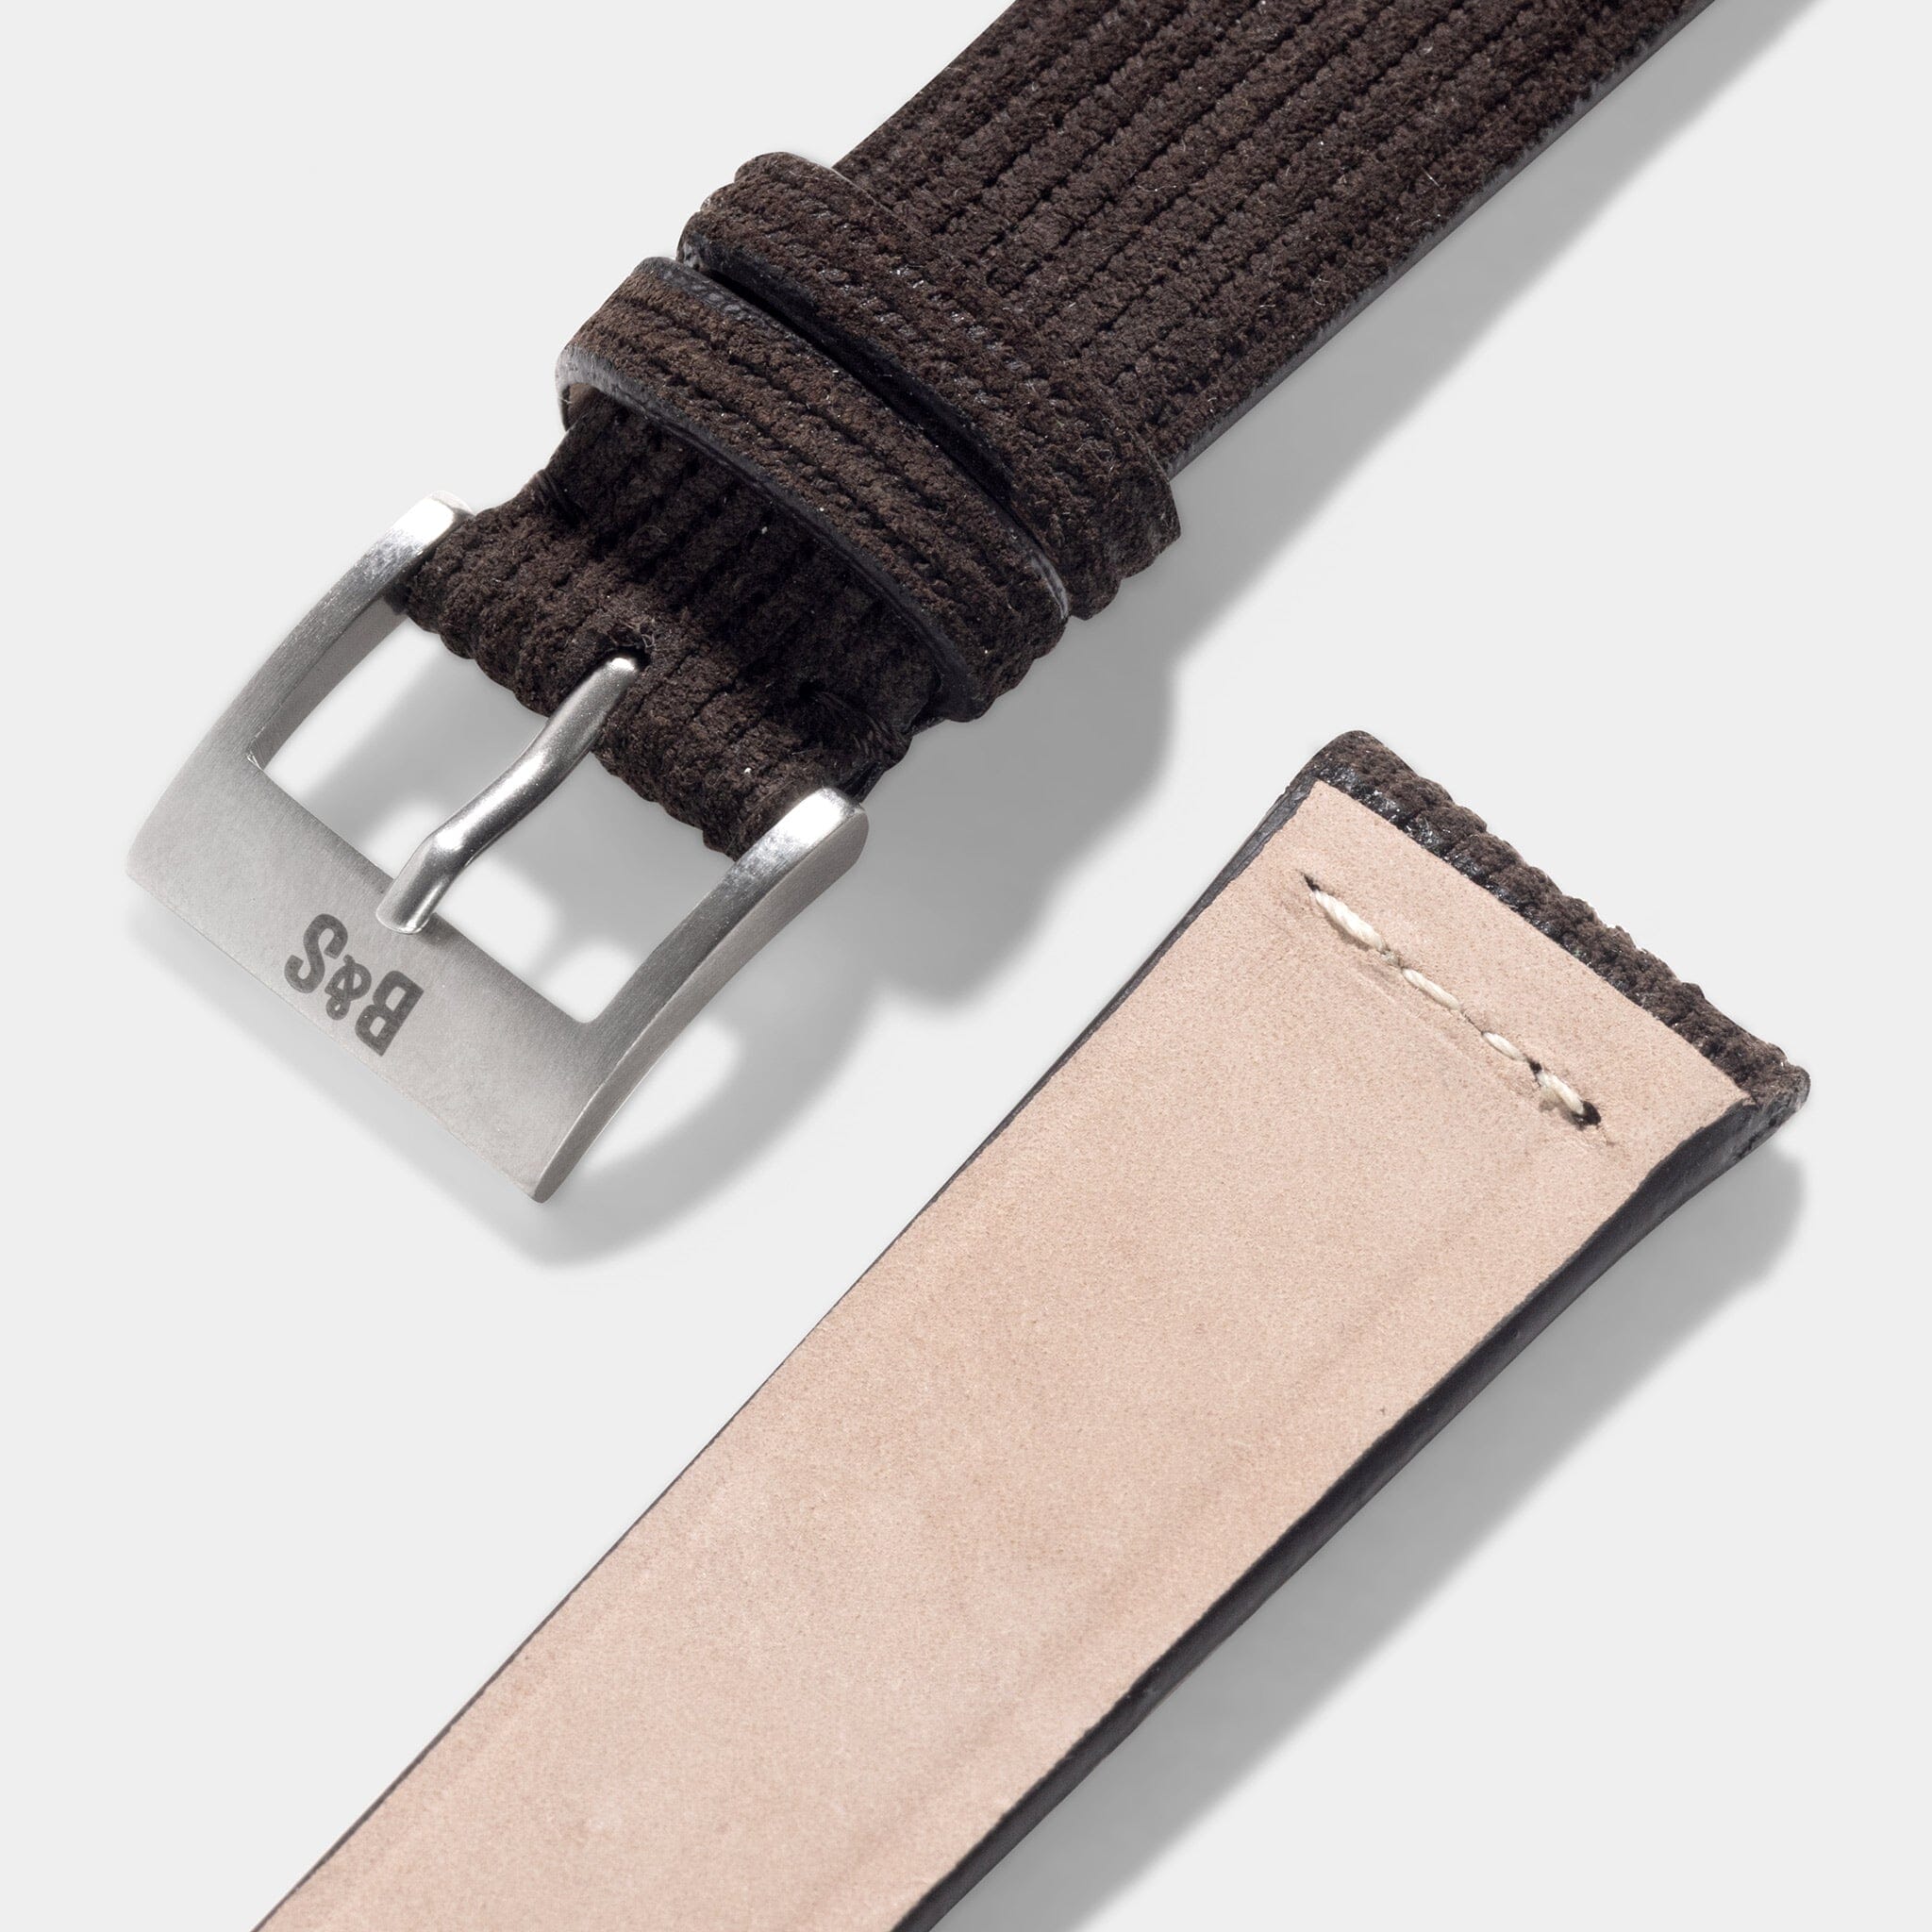 Velvet Style Brown Suede Leather Watch Strap